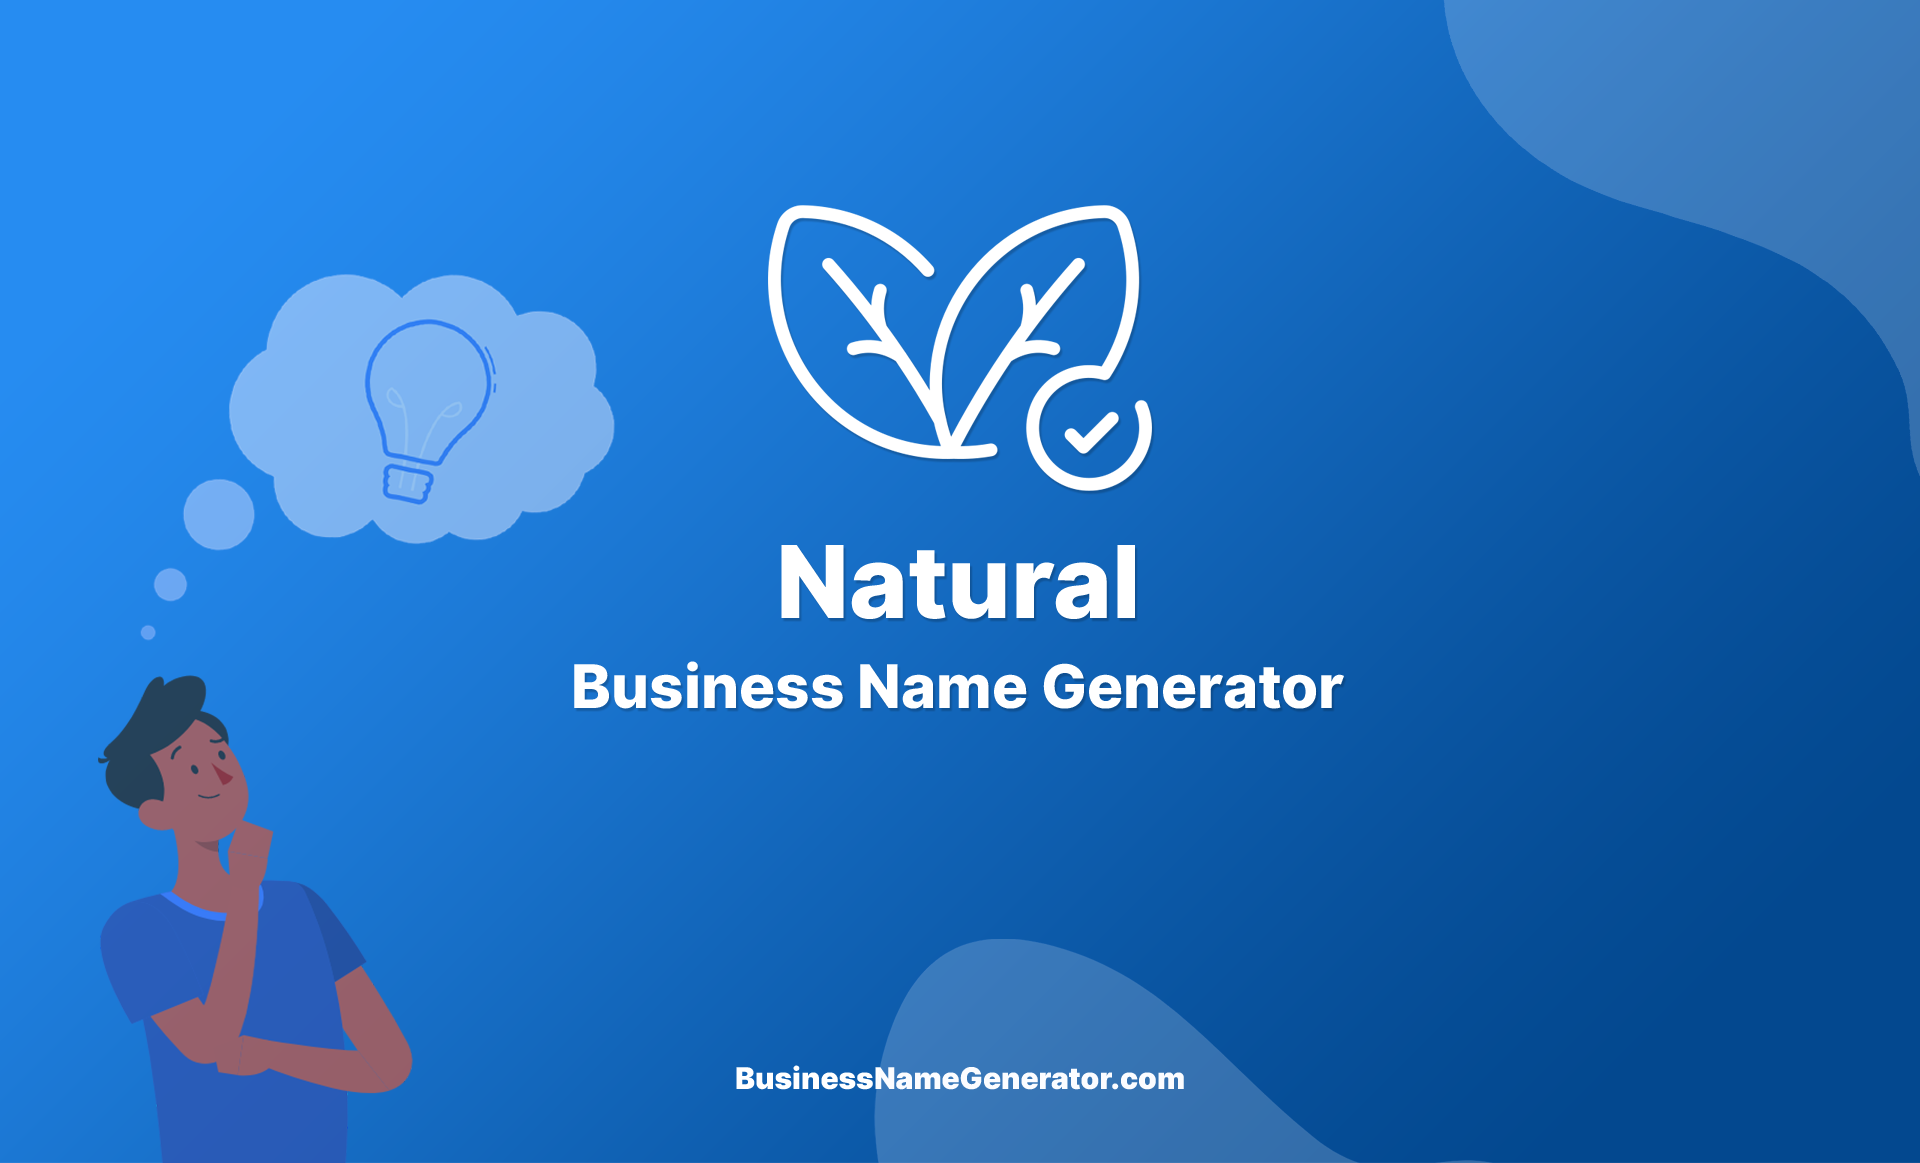 Natural Business Name Generator Guide & Ideas